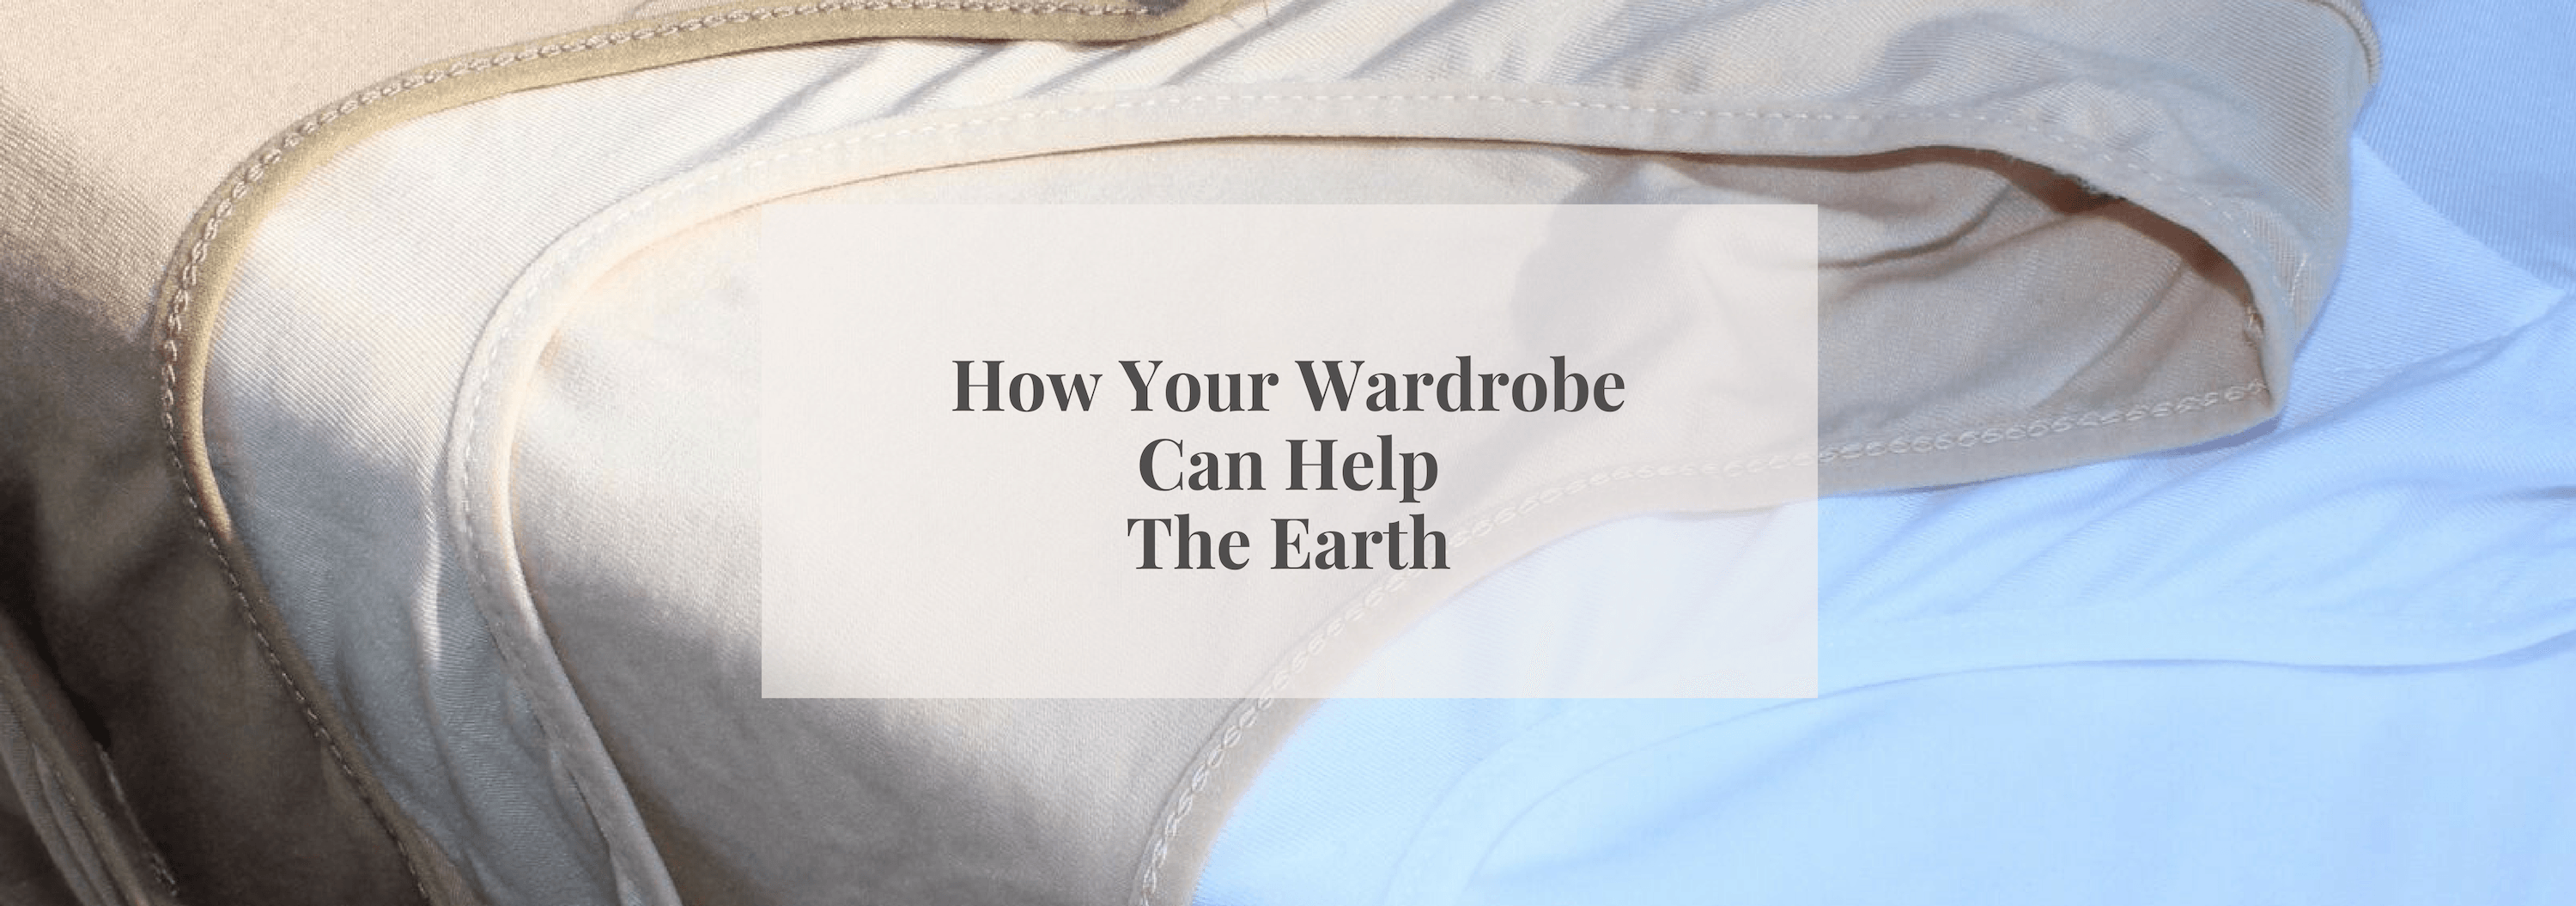 How Your Wardrobe Can Help The Earth - Numi